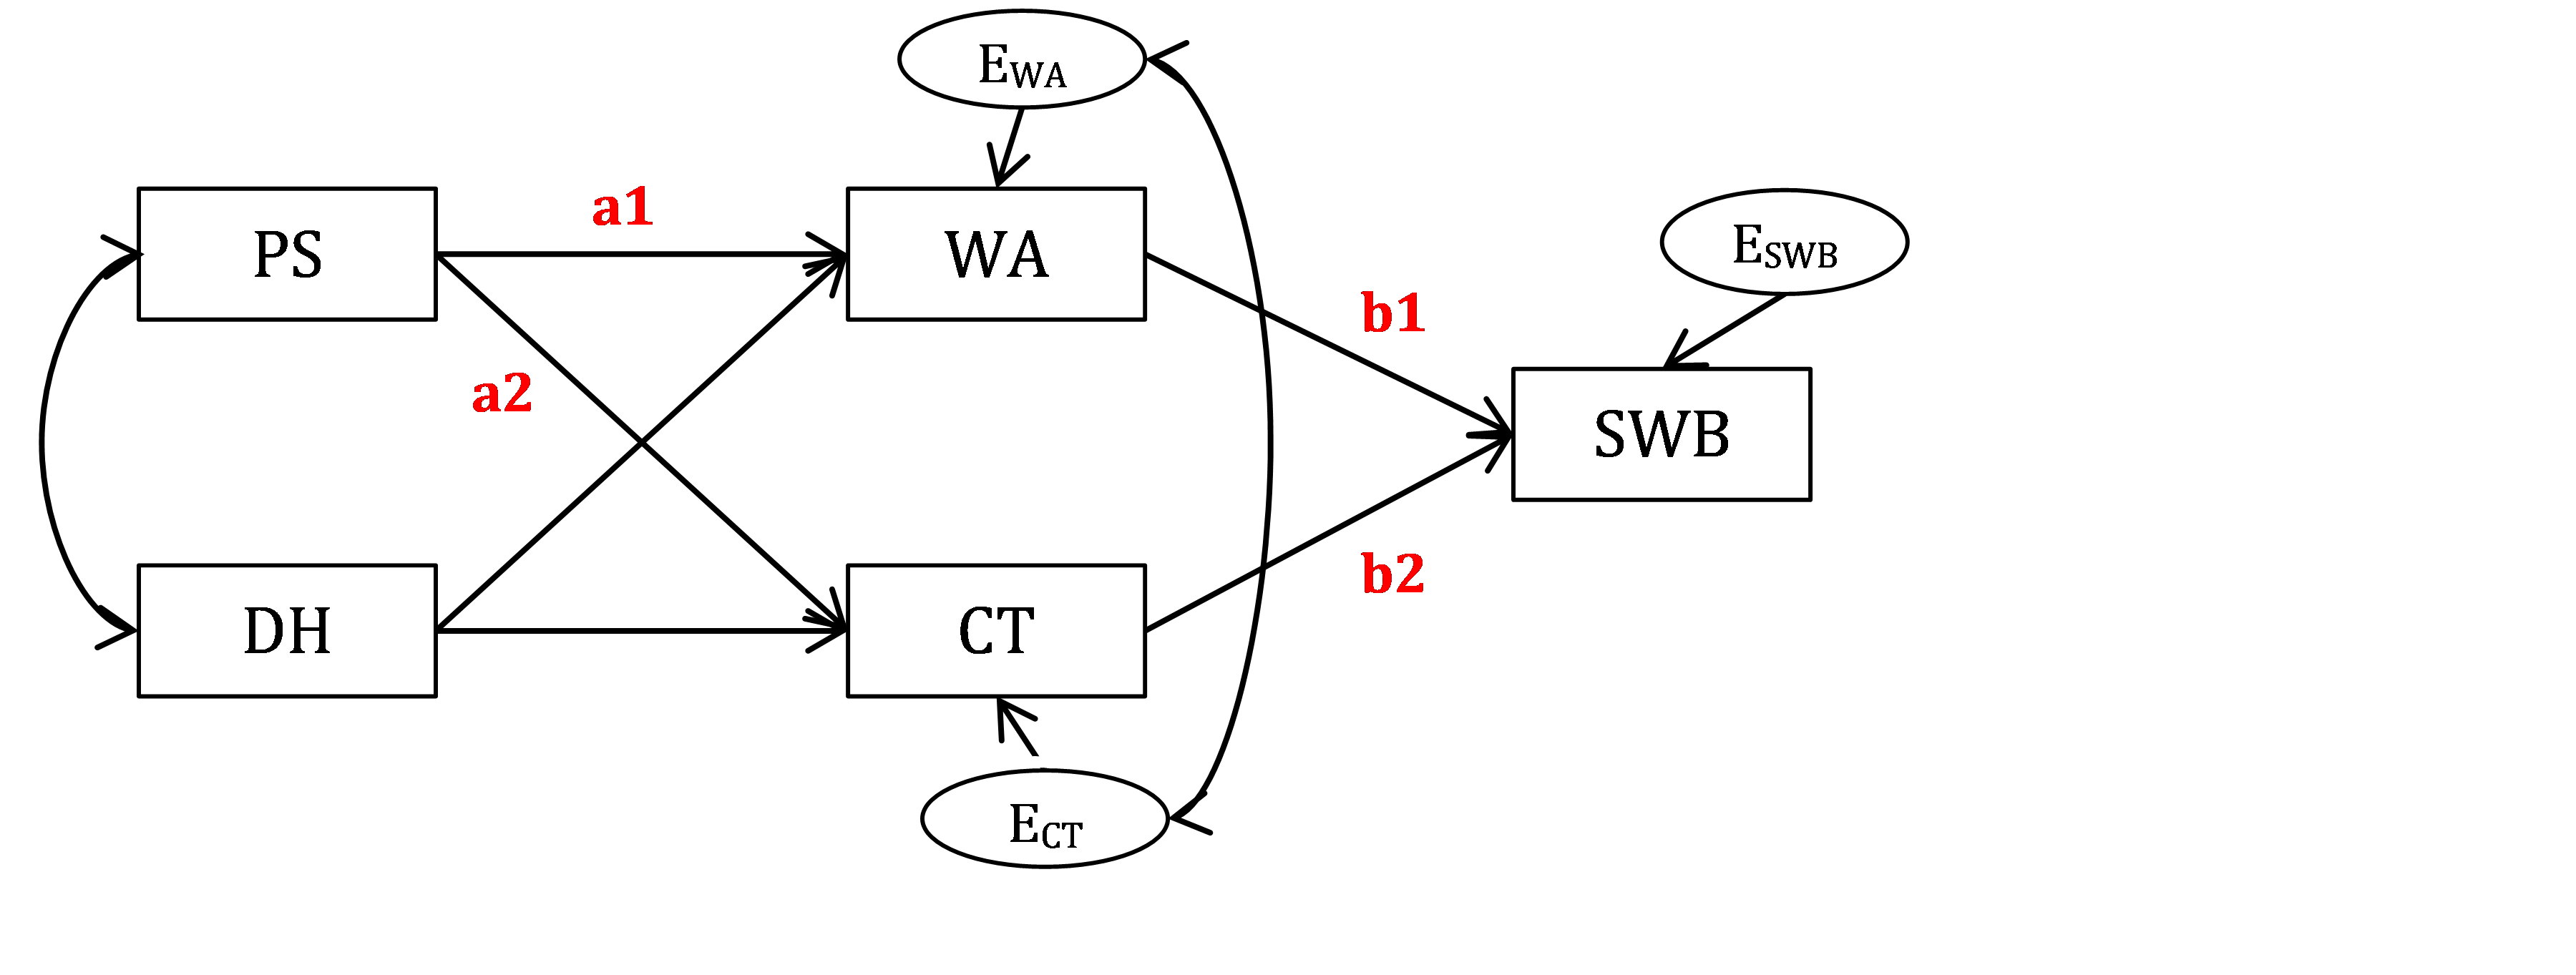 Figure 18.2. Bottom-up model of Well-being with parameter labels